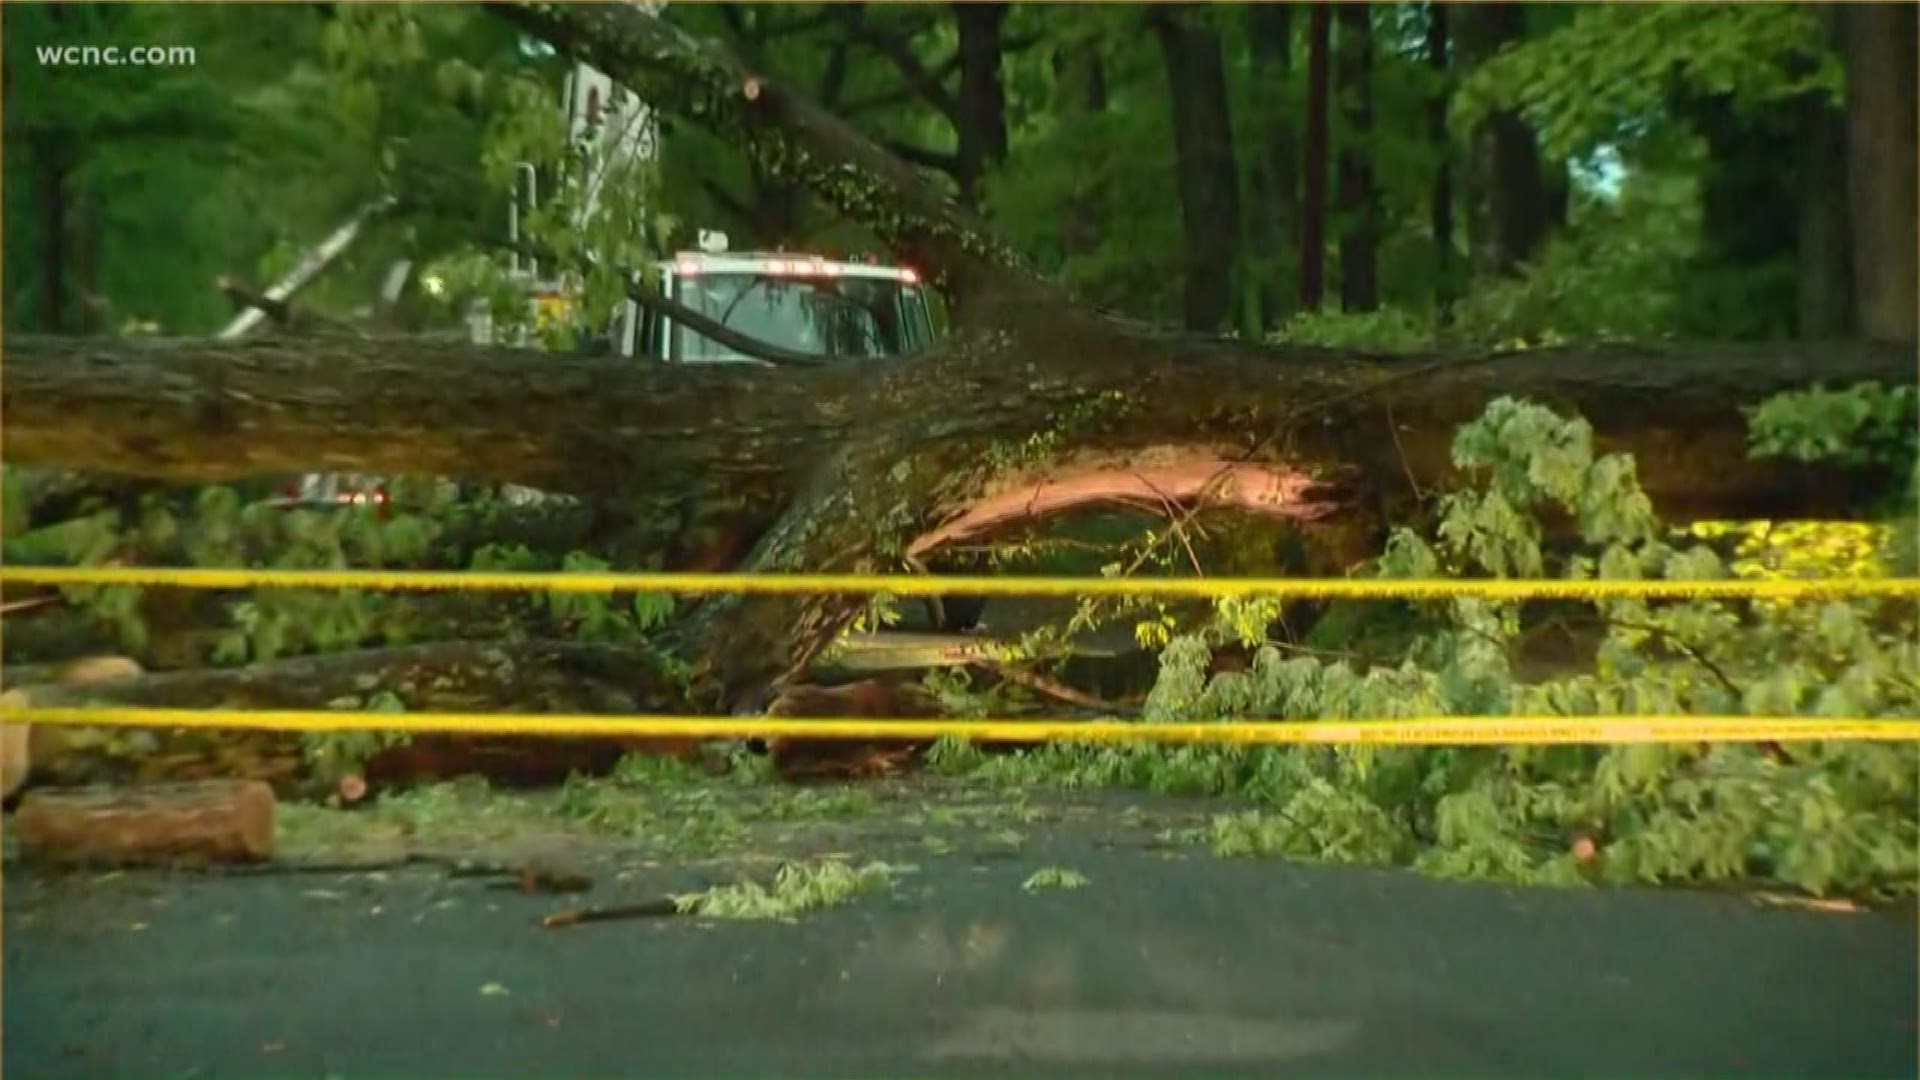 After several days of heavy rain, trees across the Charlotte area have fallen, knocking power out for several neighborhoods.